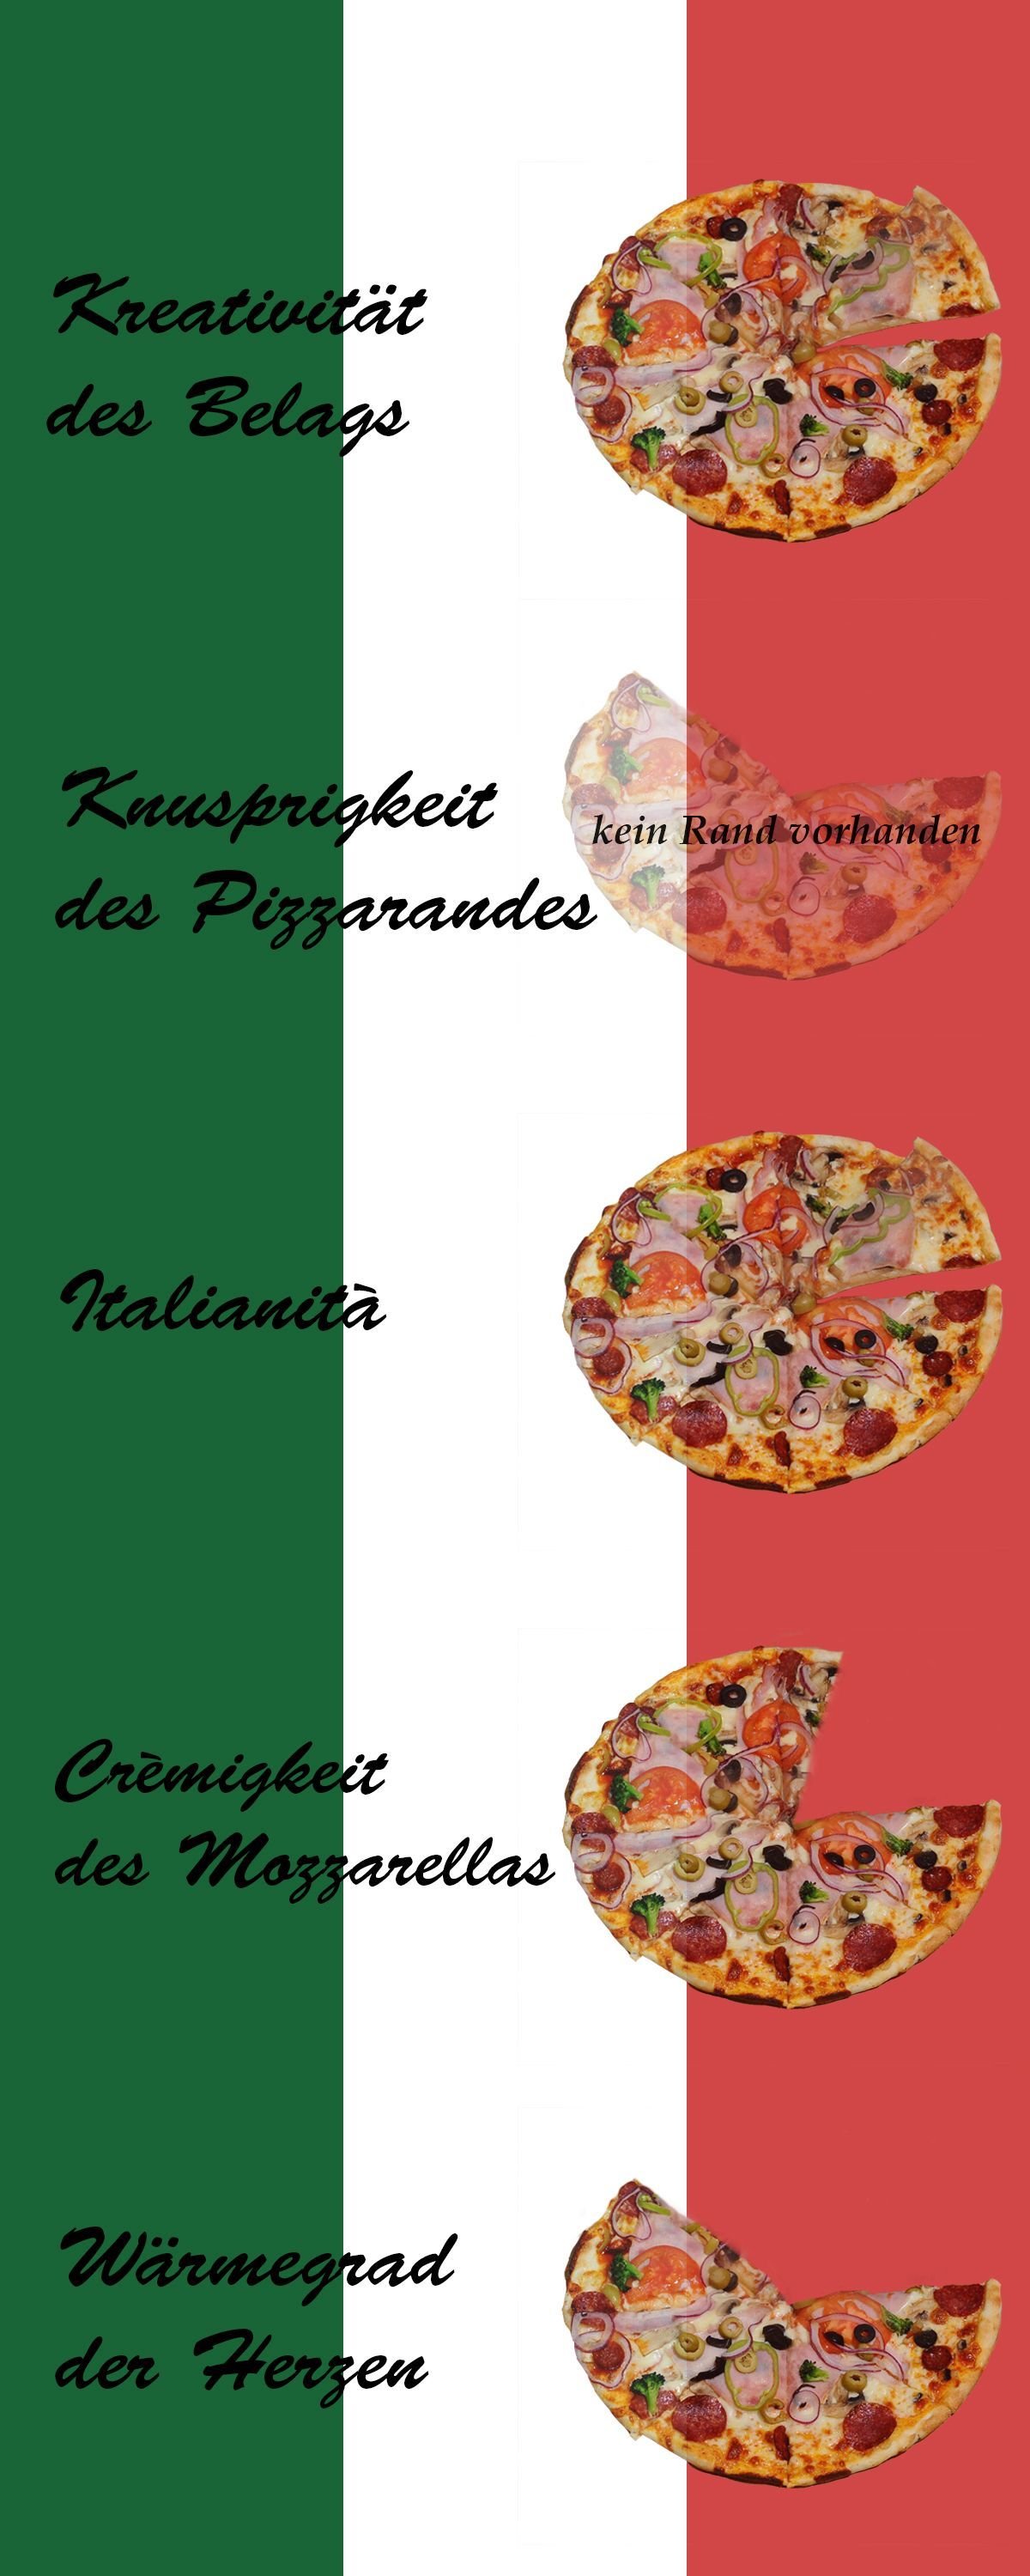 Article image for Pizza-Review No. 1 – Azzurro in Altstetten